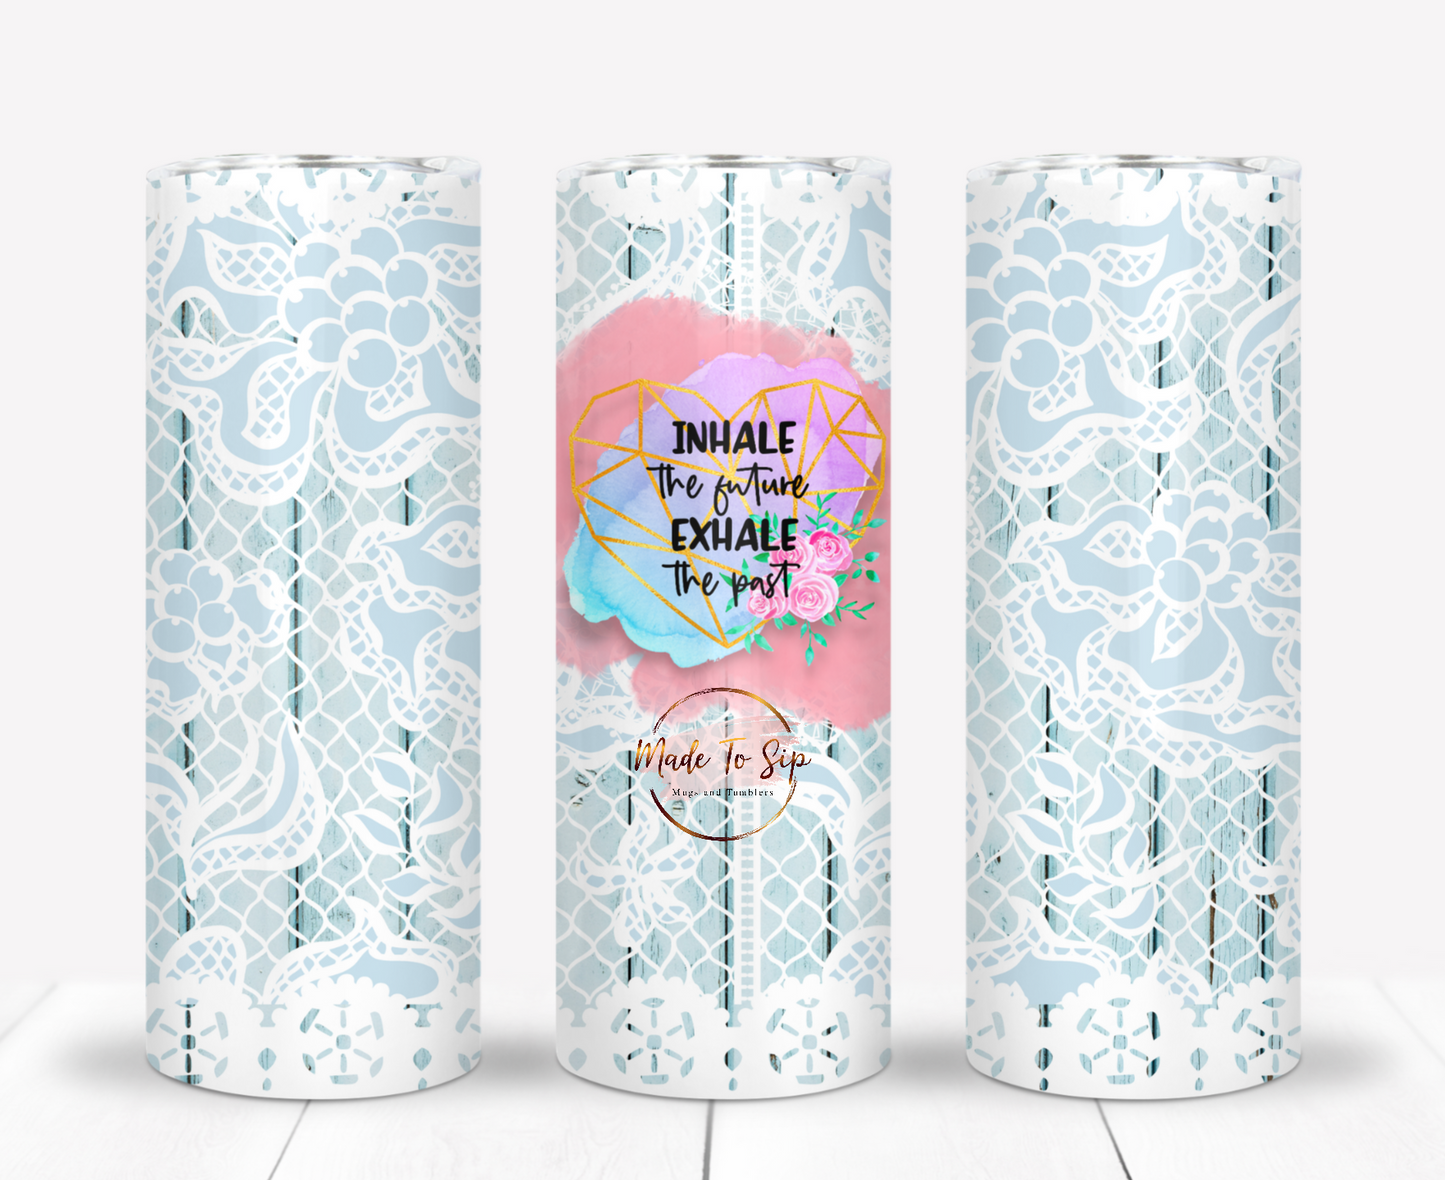 Inhale The Future 20oz Stainless Steel Tumbler